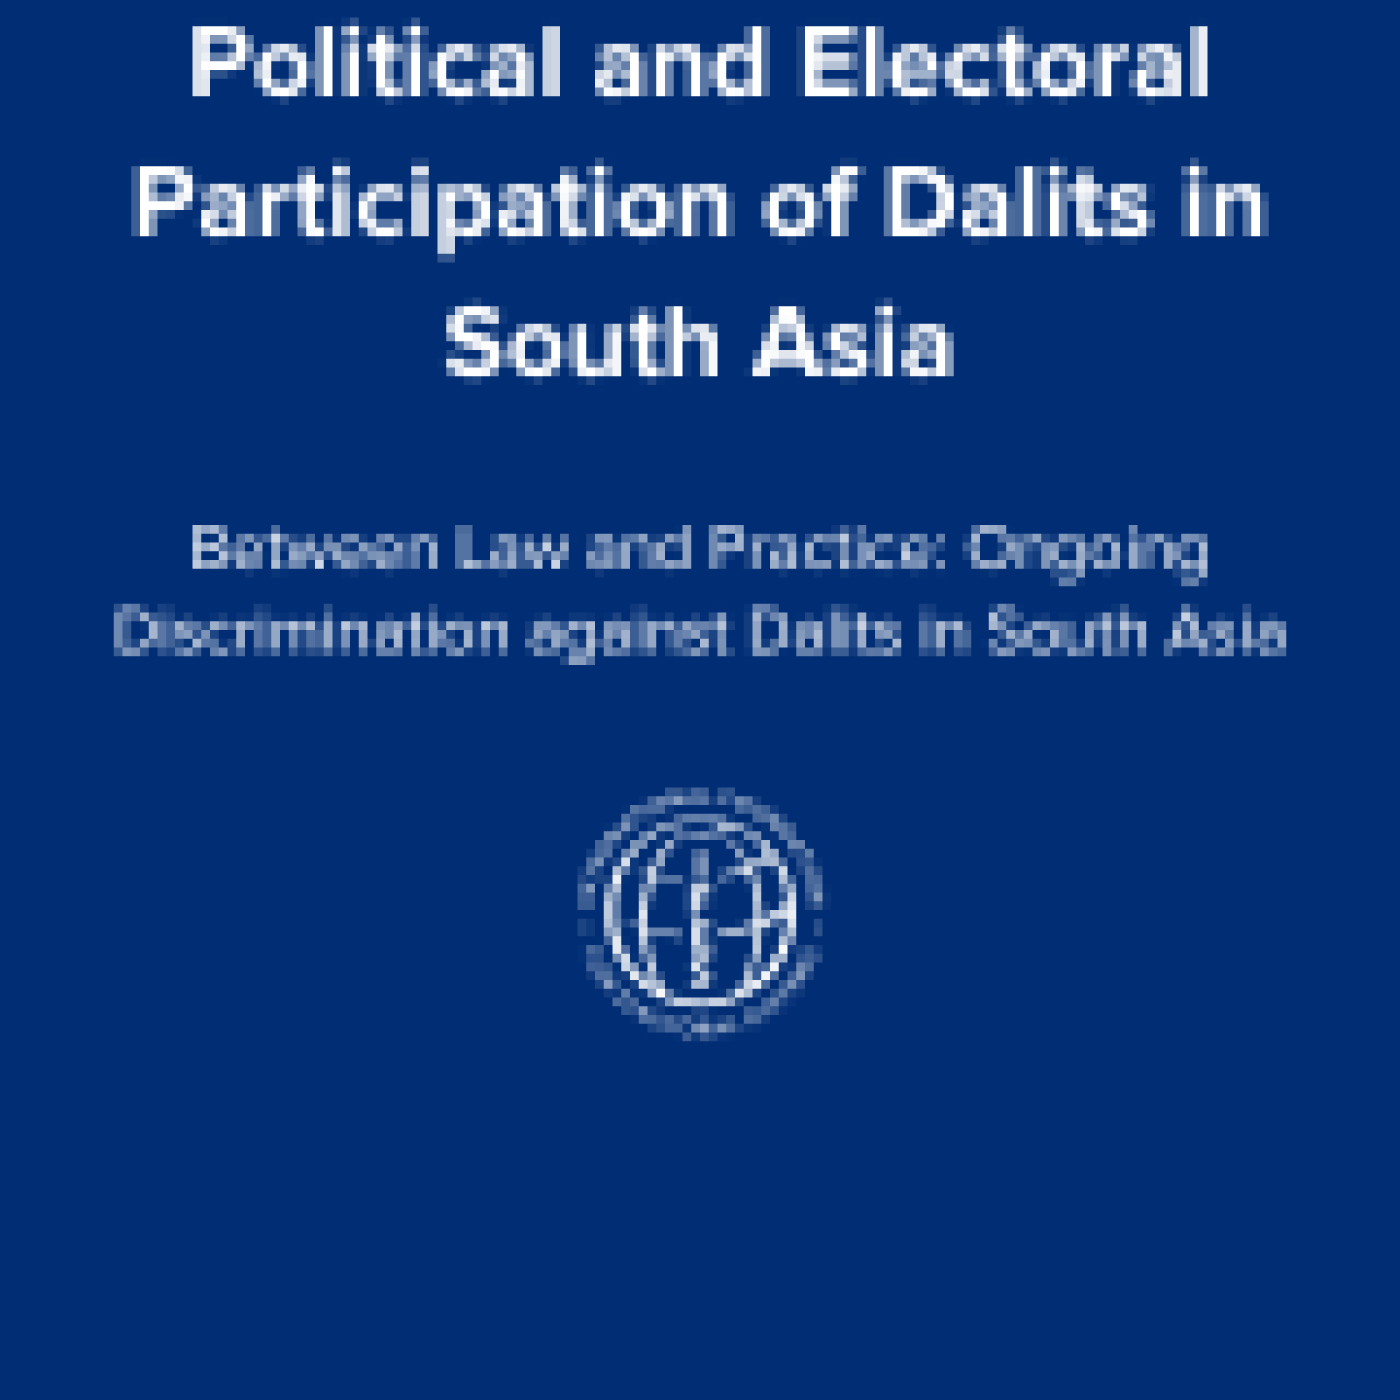 Political and Electoral Participation of Dalits in South Asia: Between Law and Practice: Ongoing Discrimination against Dalits in South Asia